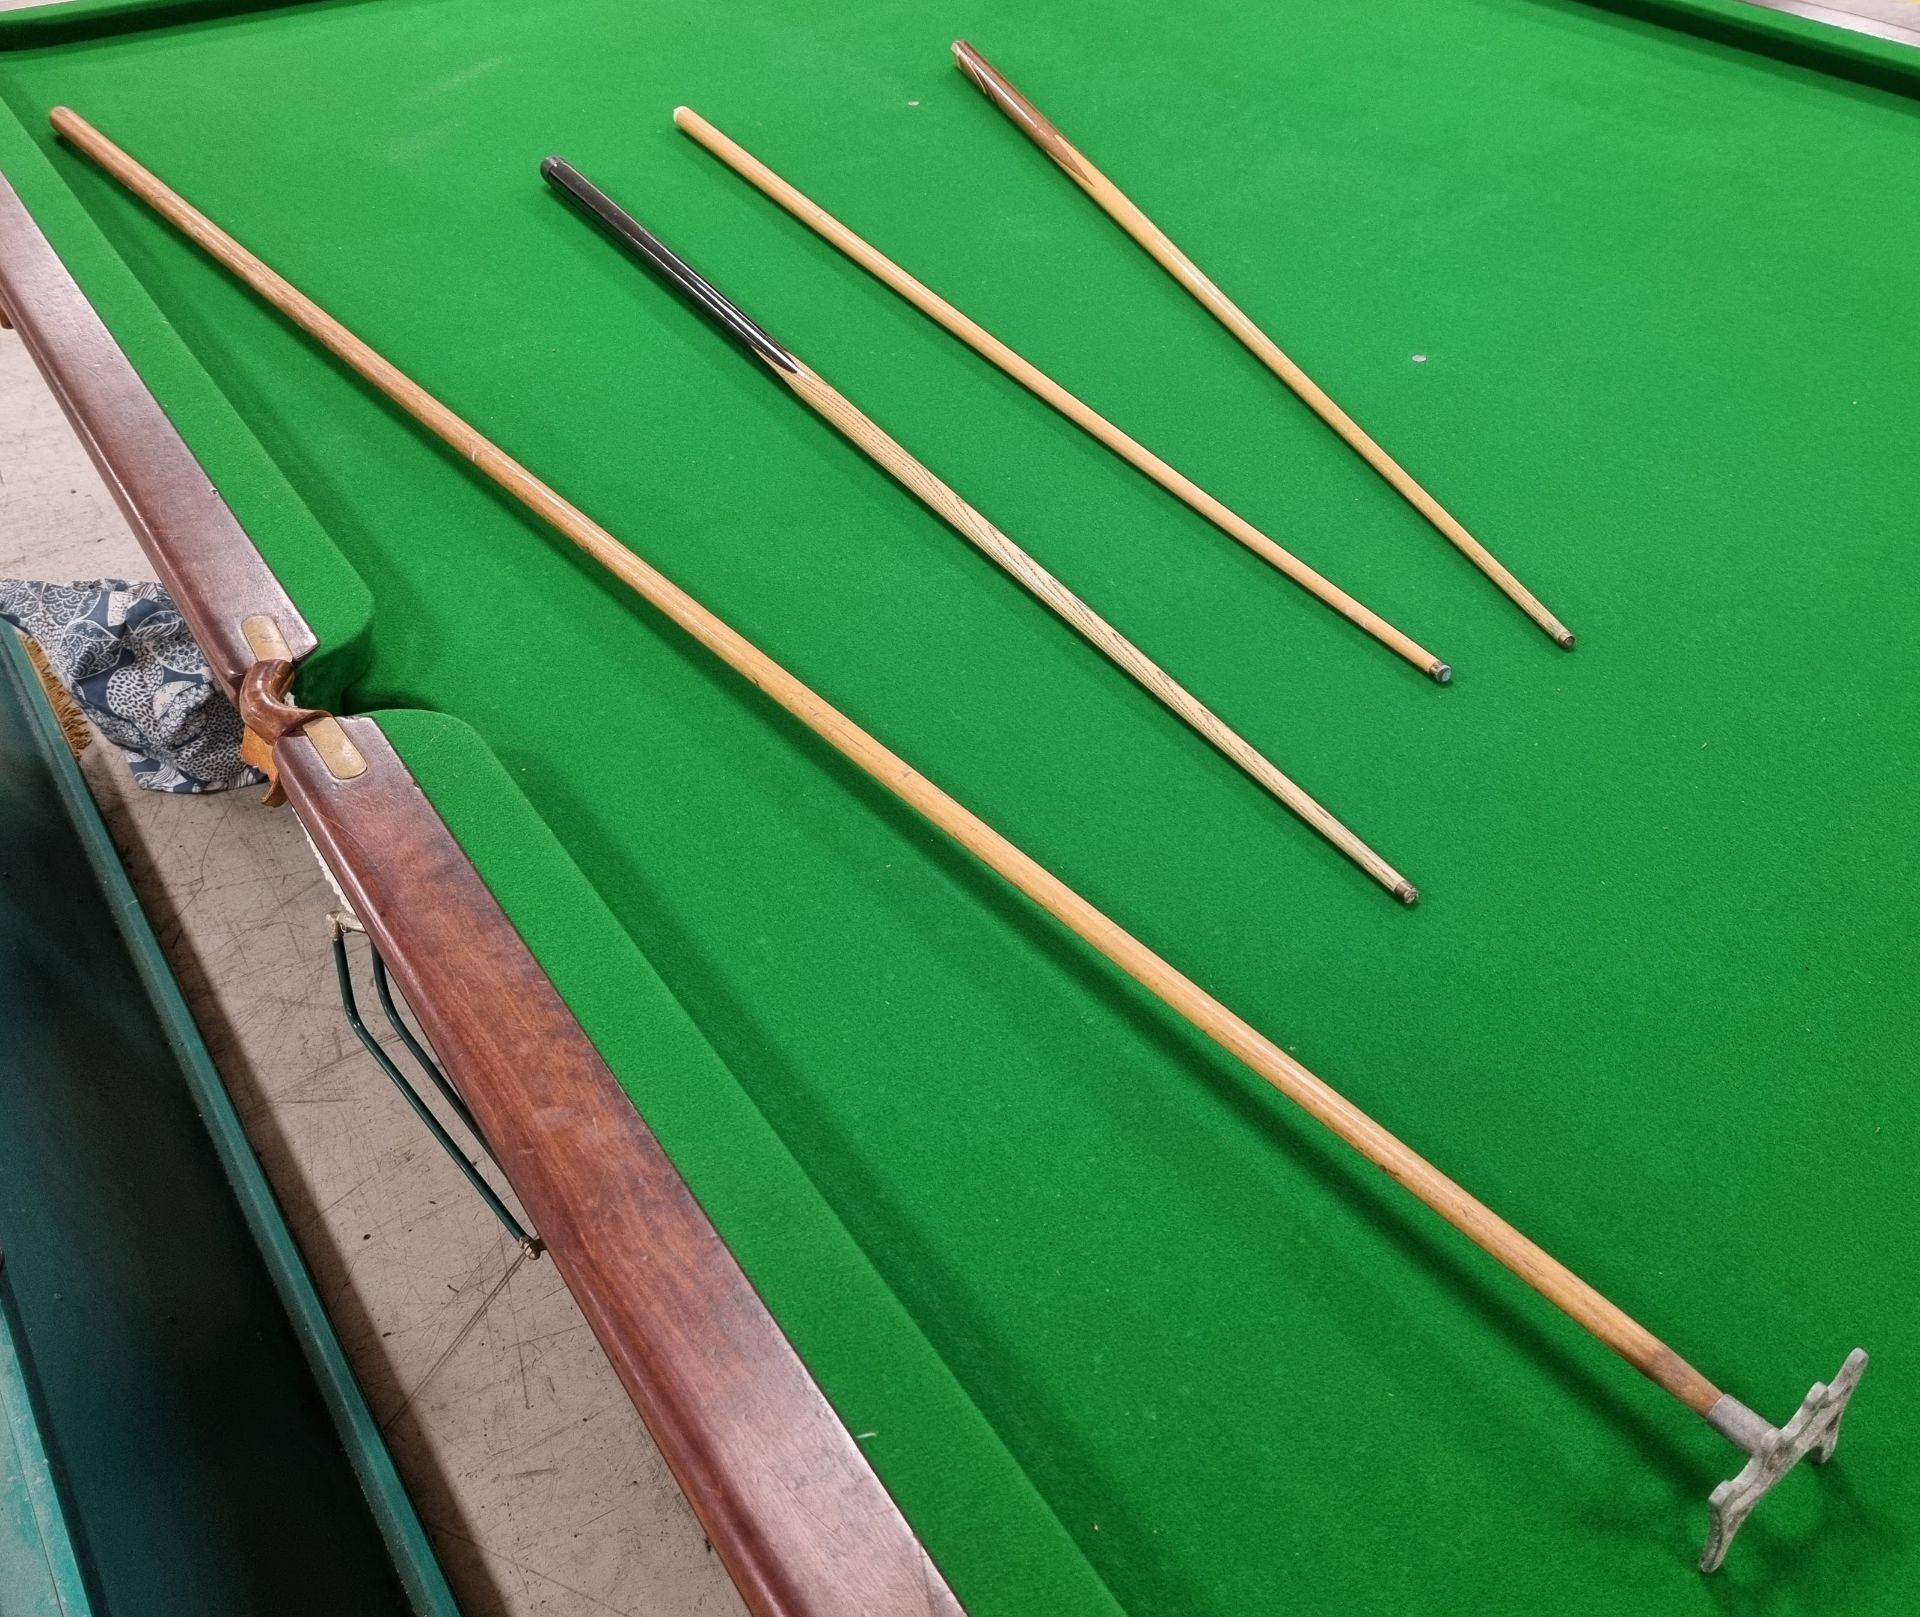 Orme & Sons Manchester 12ft snooker table with cues, cue rests, cover, and lighting - Image 12 of 25